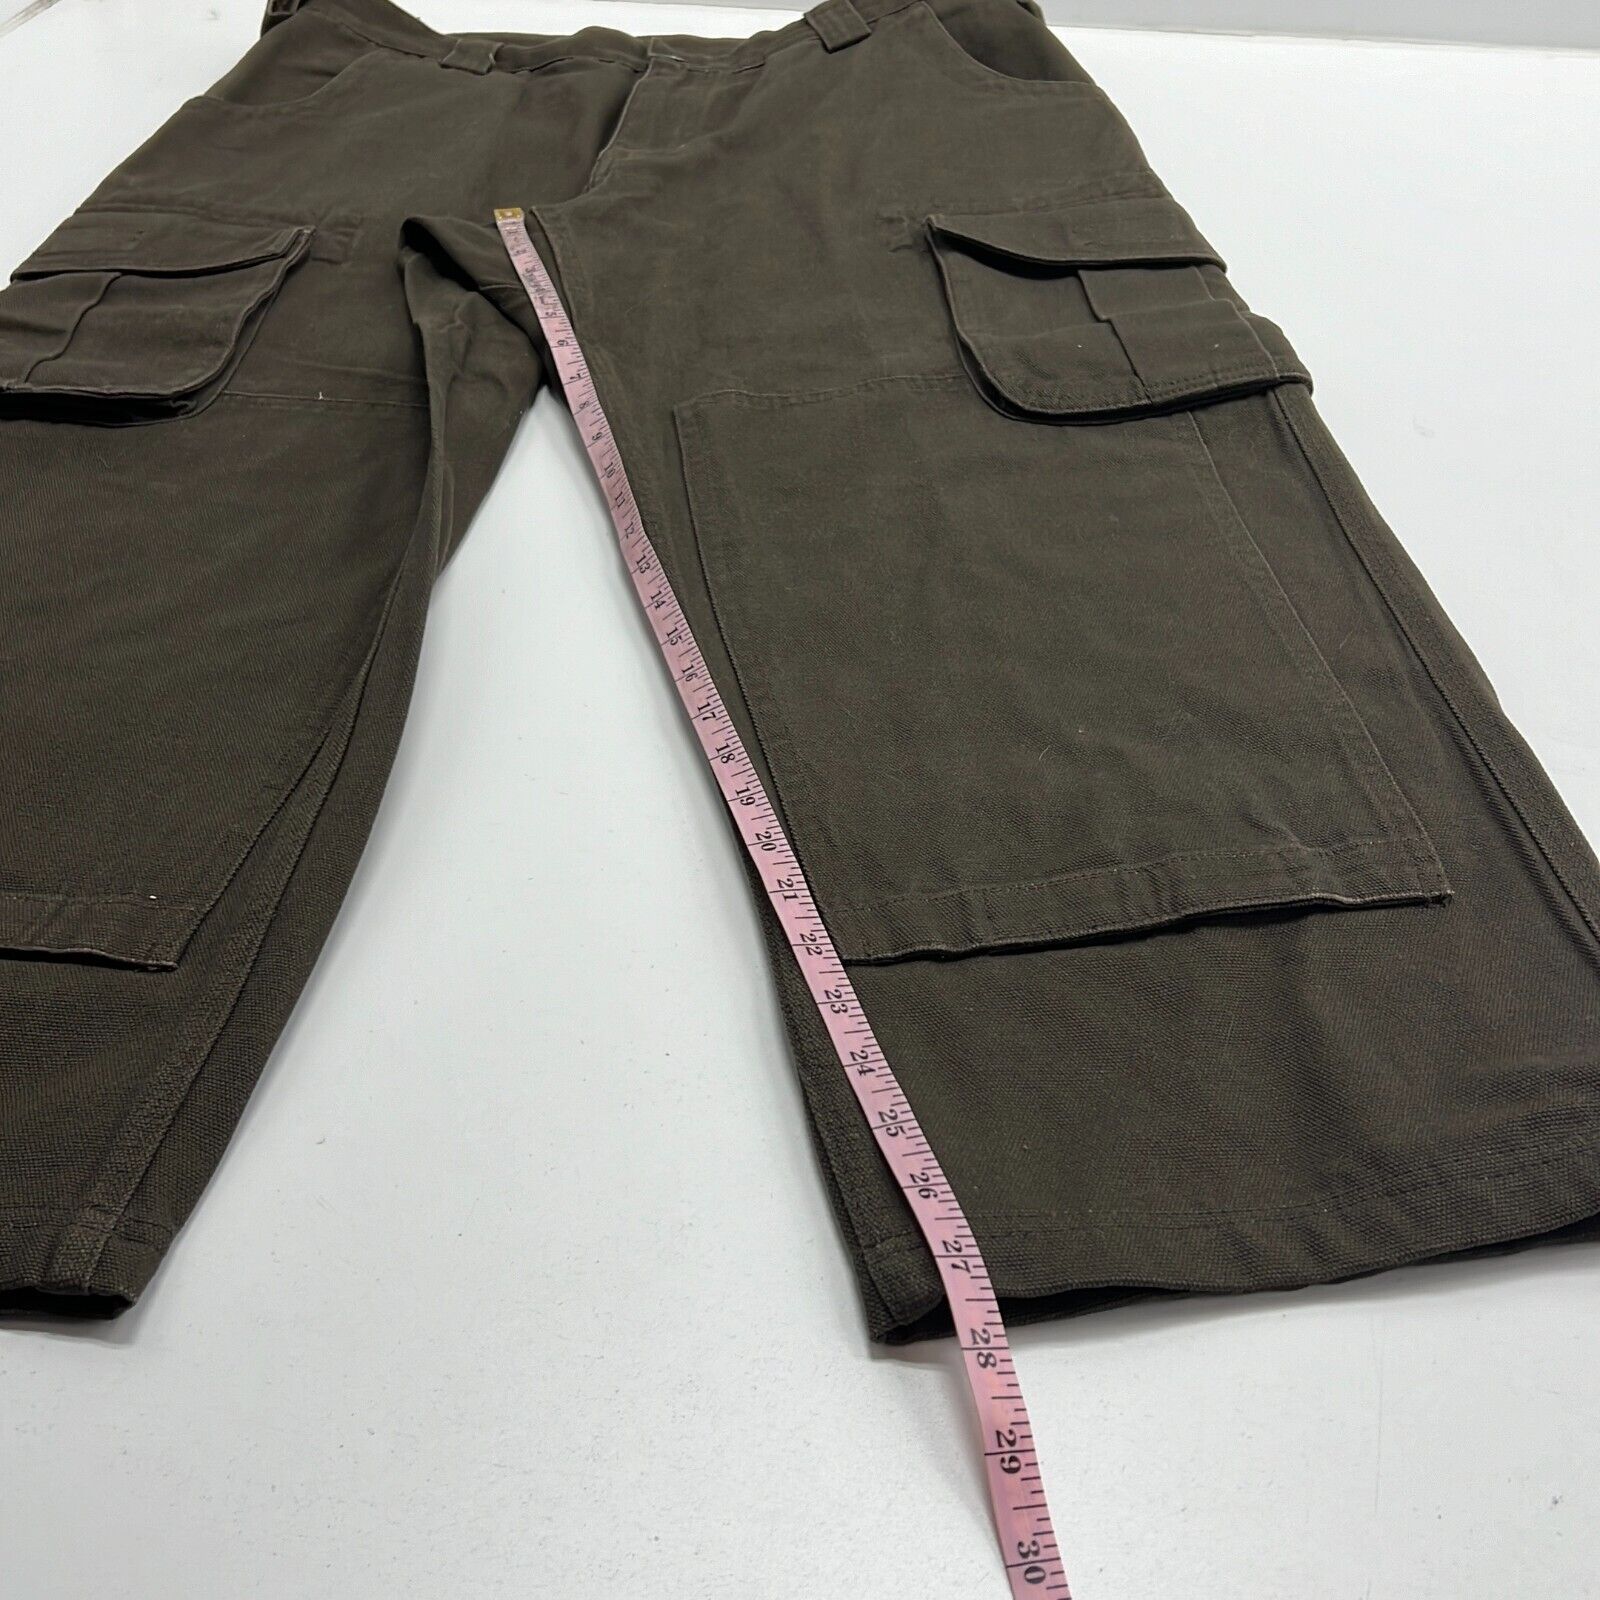 Duluth Trading Co. Men's Brown Cotton Flat Front Pockets Cargo Pants Size 36x30